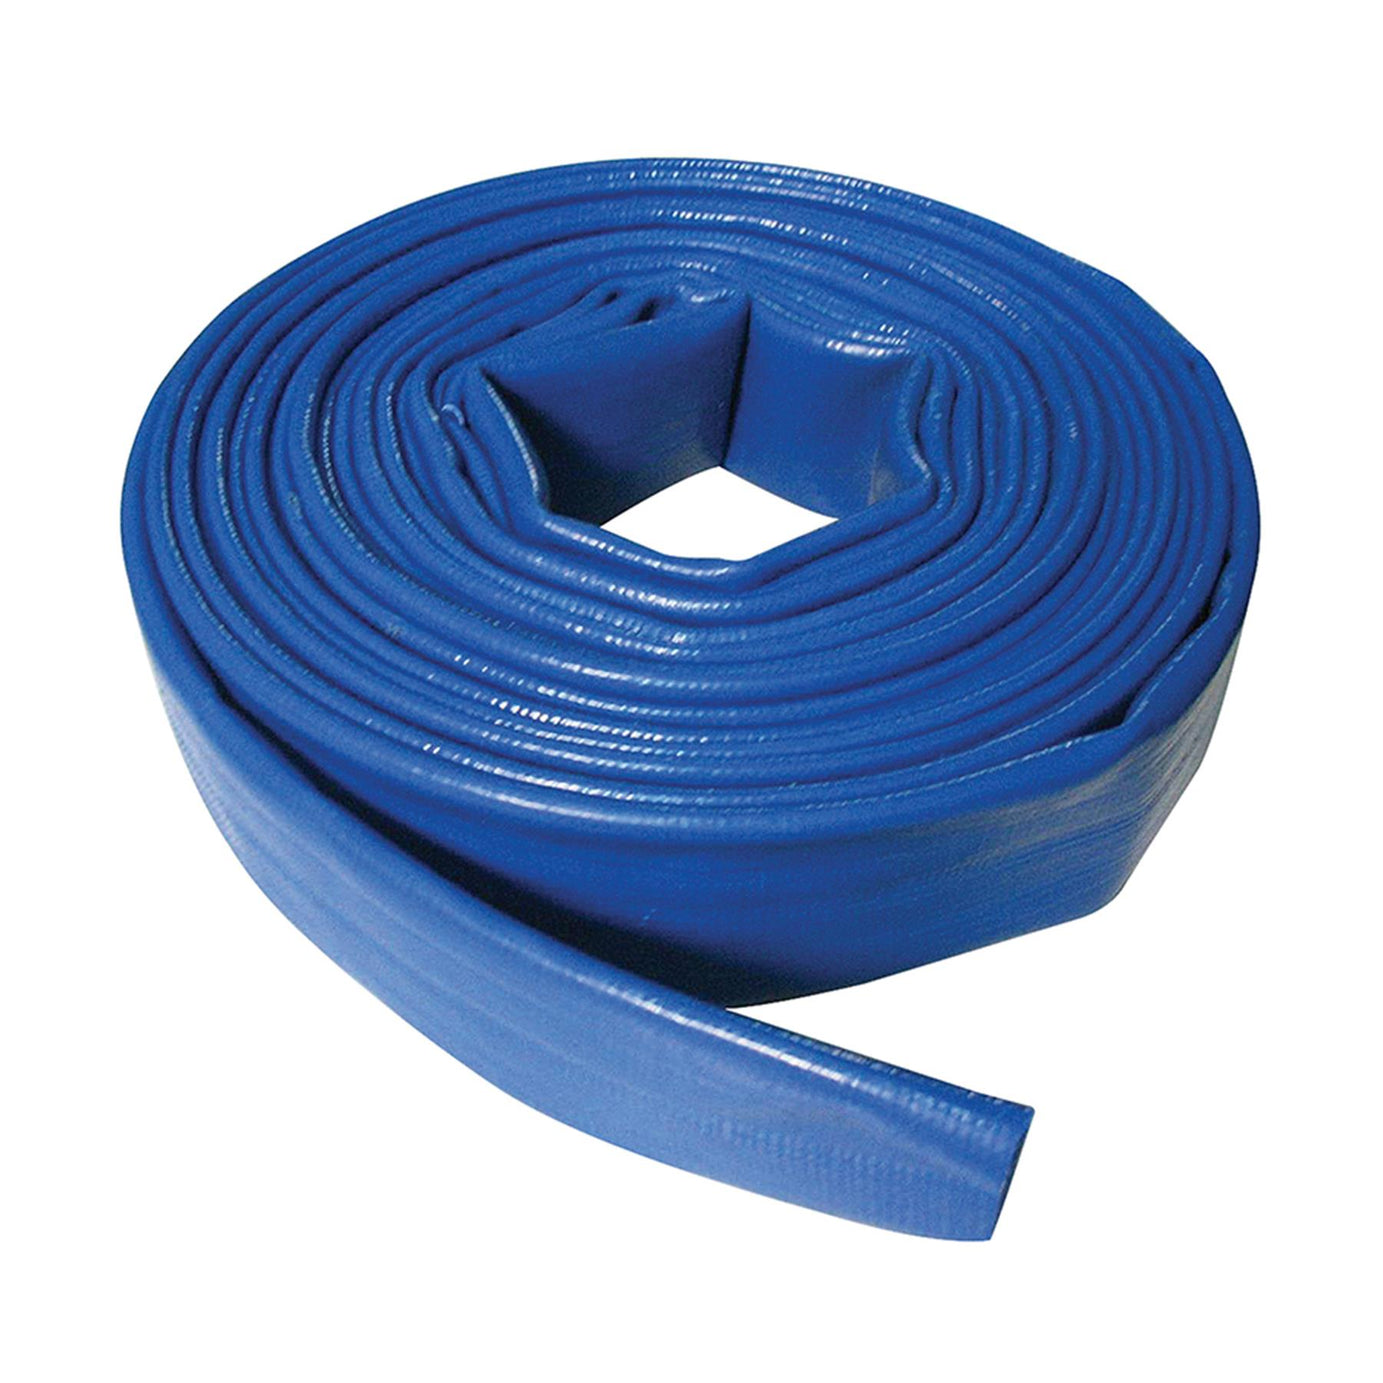 Blue Layflat Water Delivery Hose 10M X 32mm Discharge Pump Irrigation